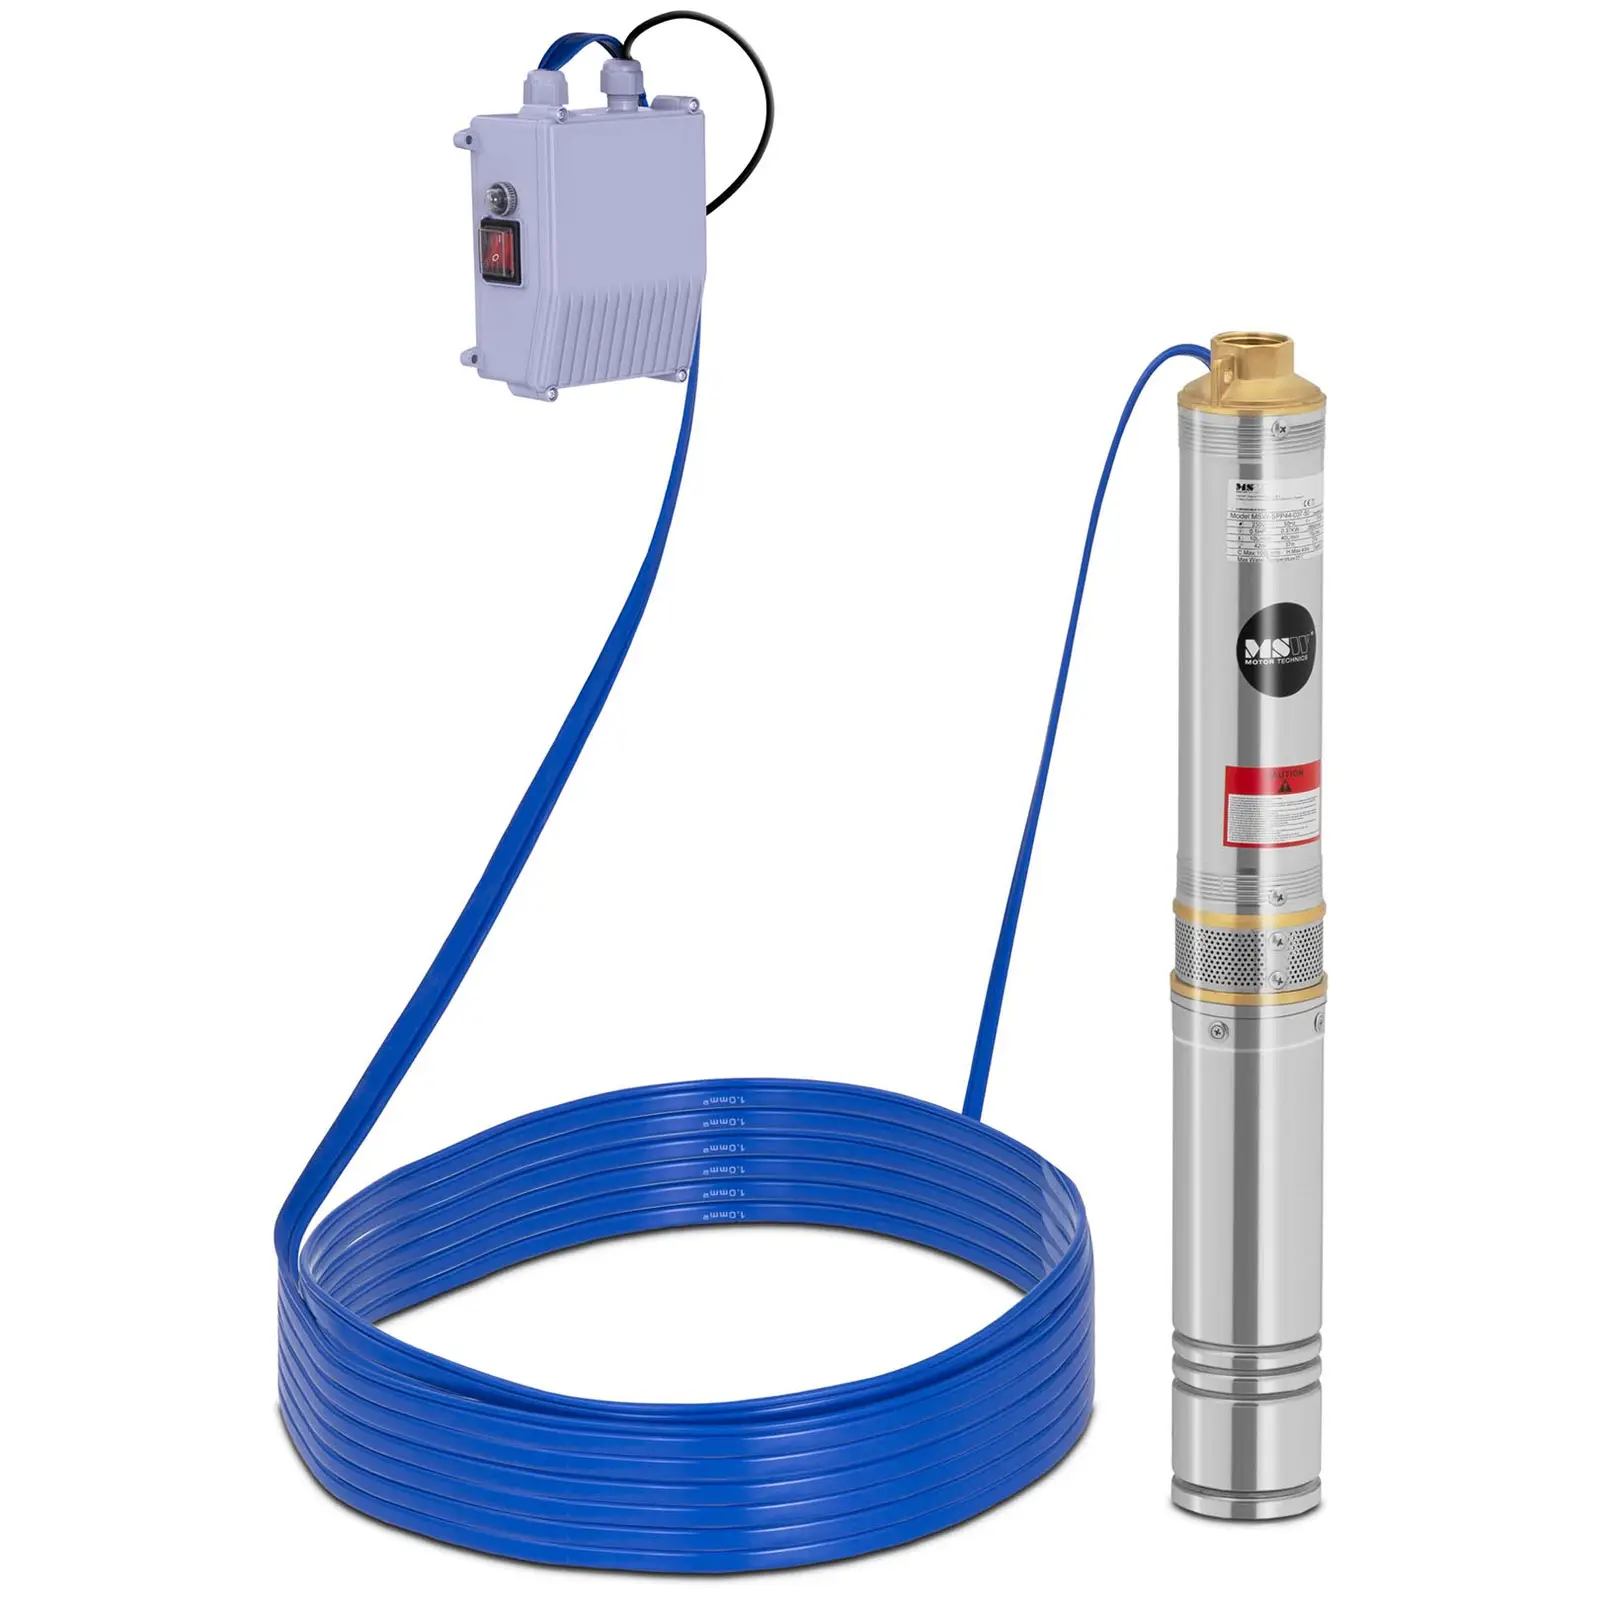 Submersible Pump - 6000 l/h - 500 W - stainless steel